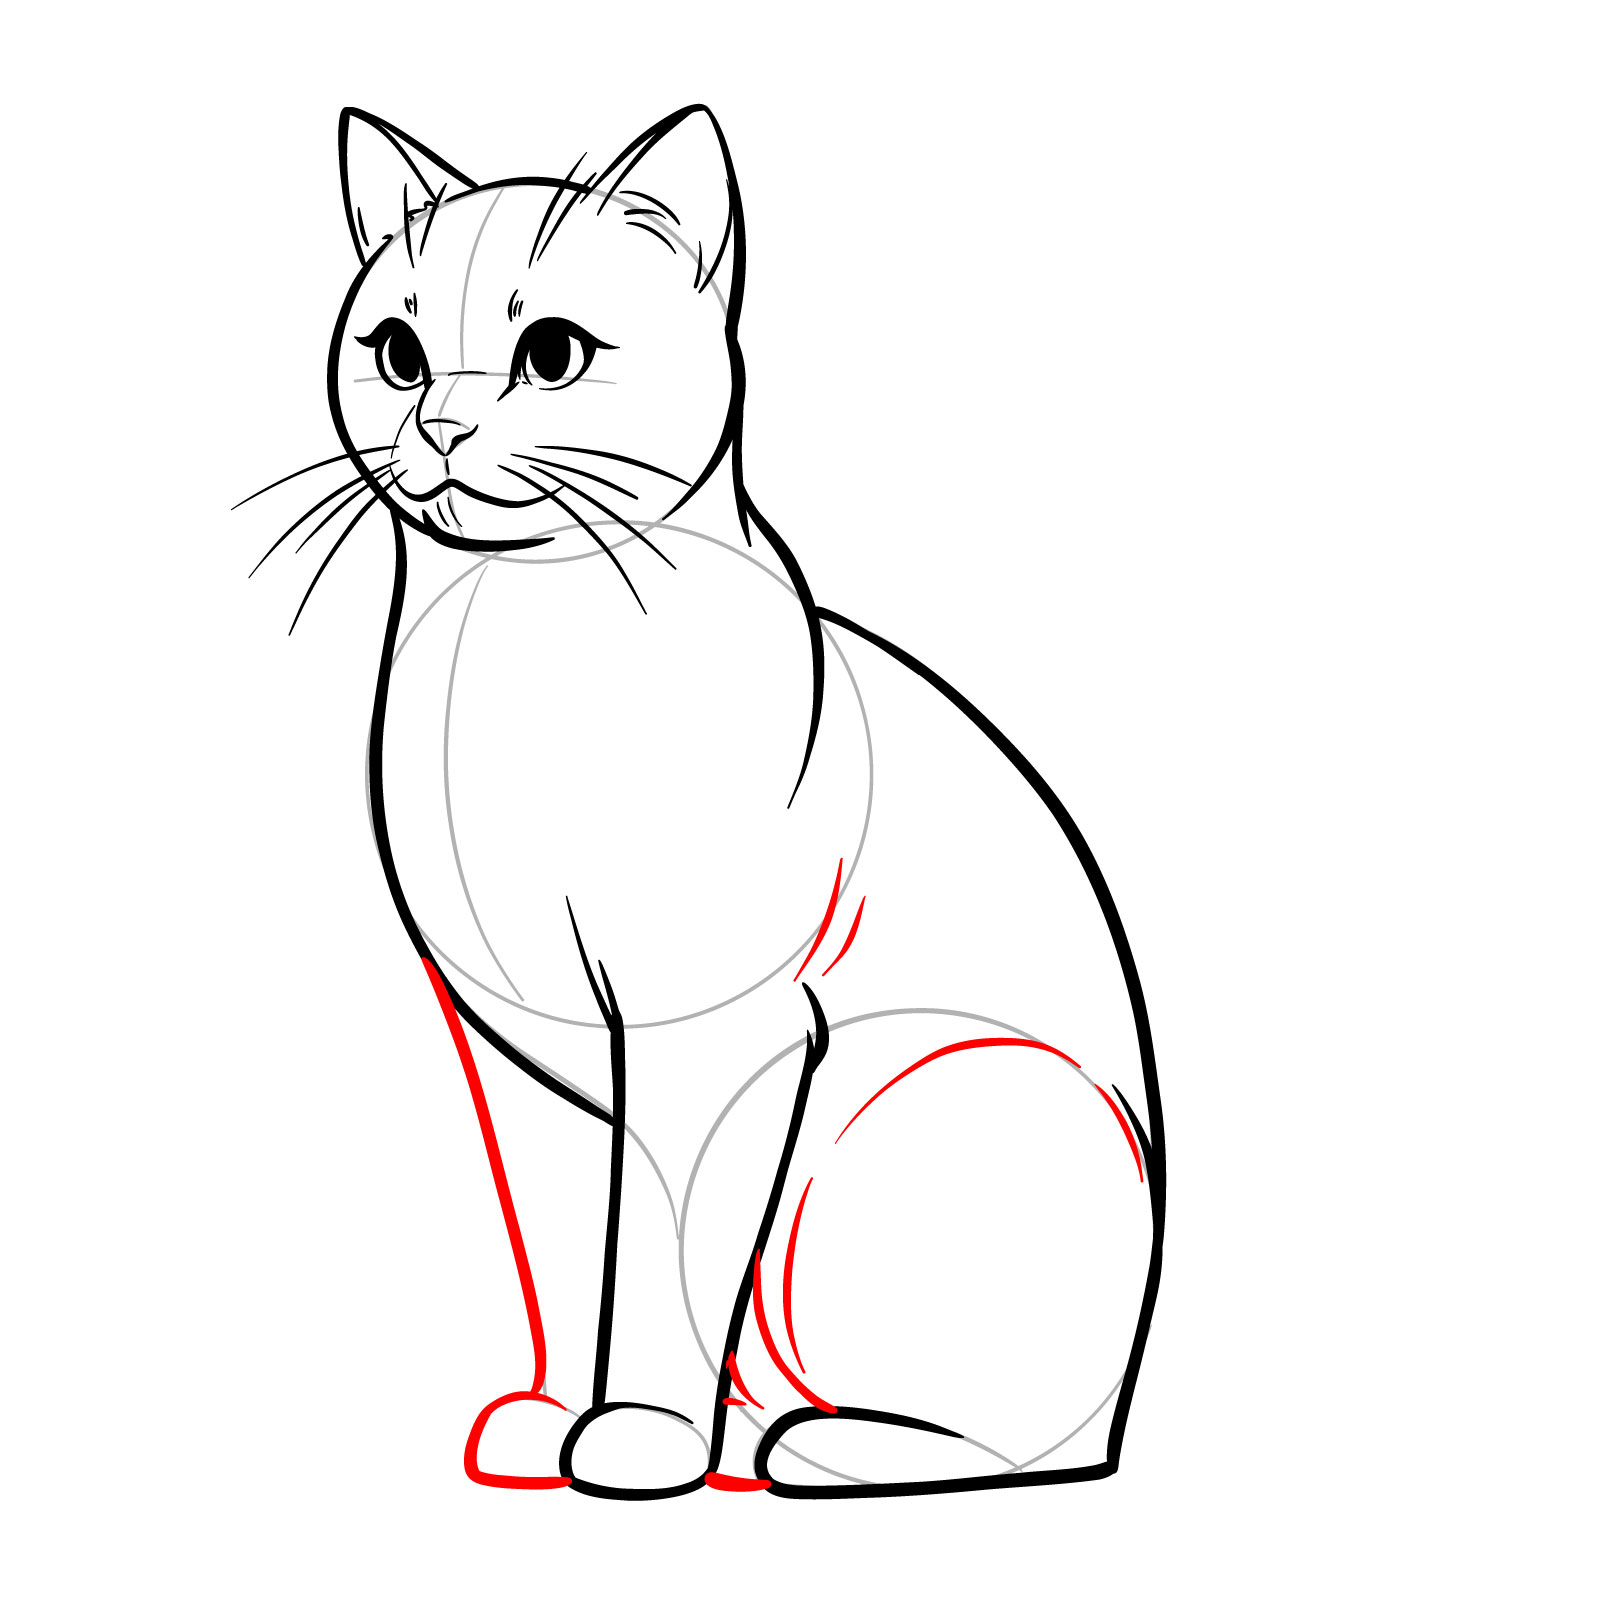 Detailed sketch of a cat's legs, adding muscle lines for a realistic depiction - step 11